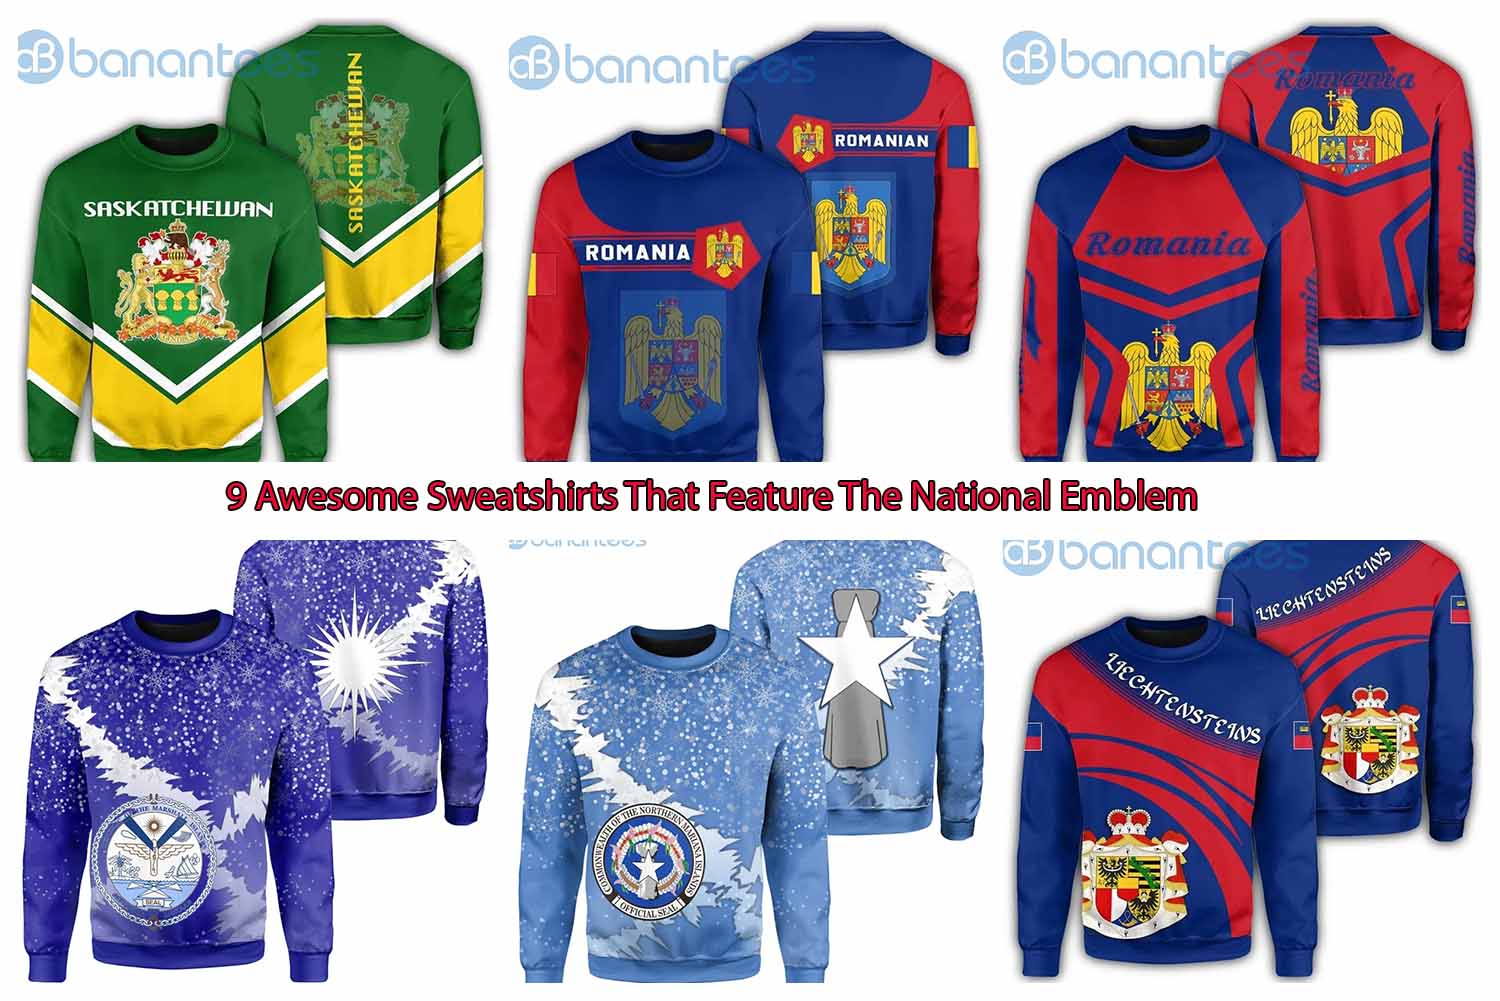 9 Awesome Sweatshirts That Feature The National Emblem